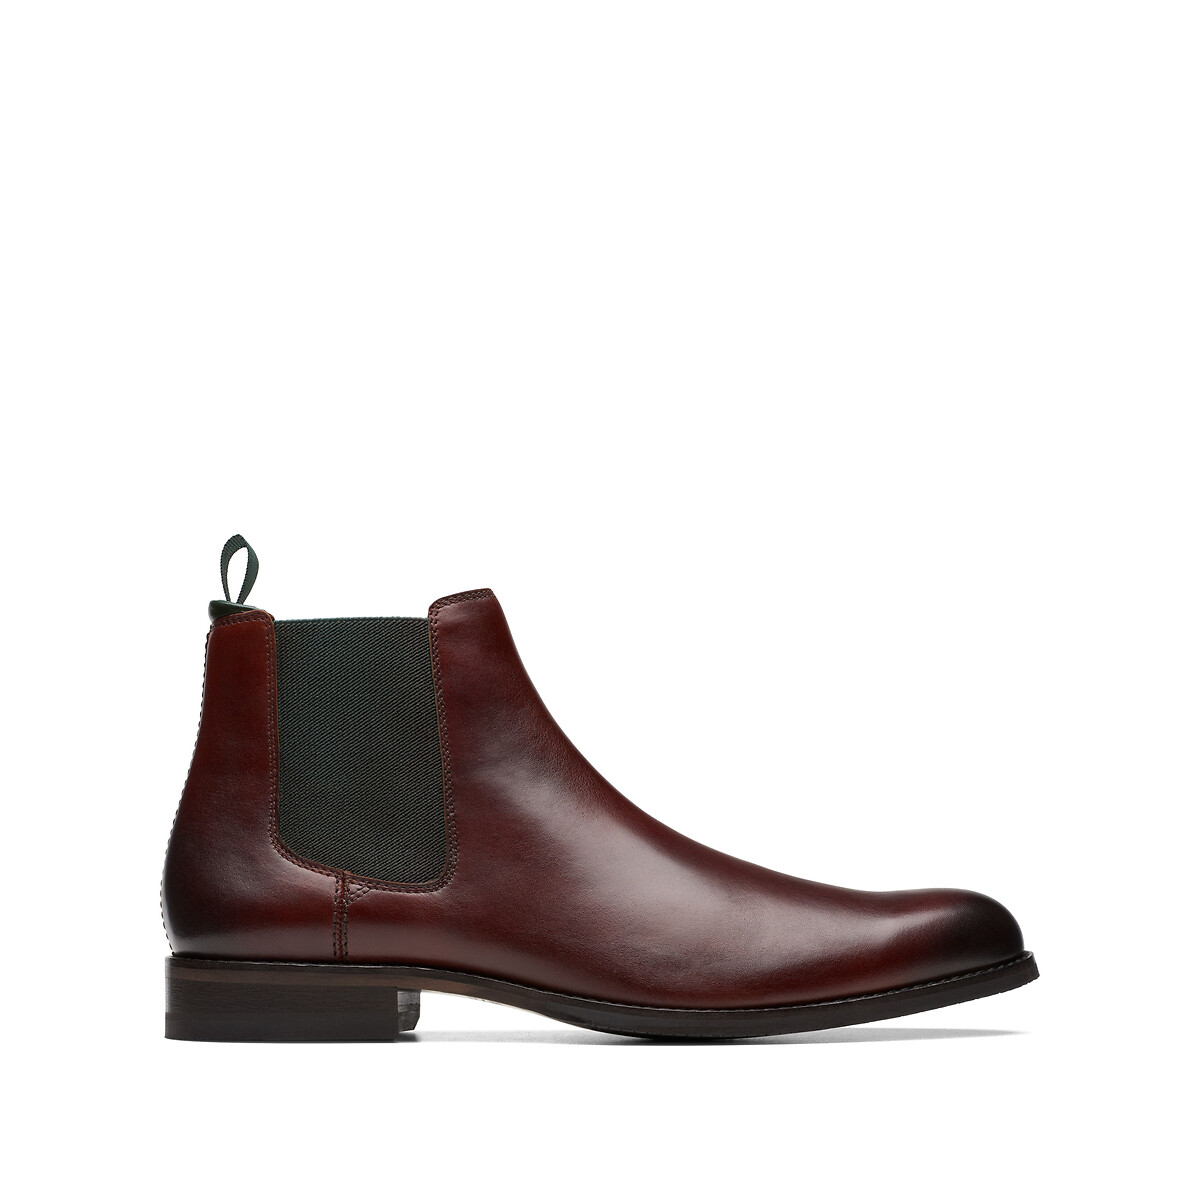 Craft Arlo Chelsea Boots in Leather